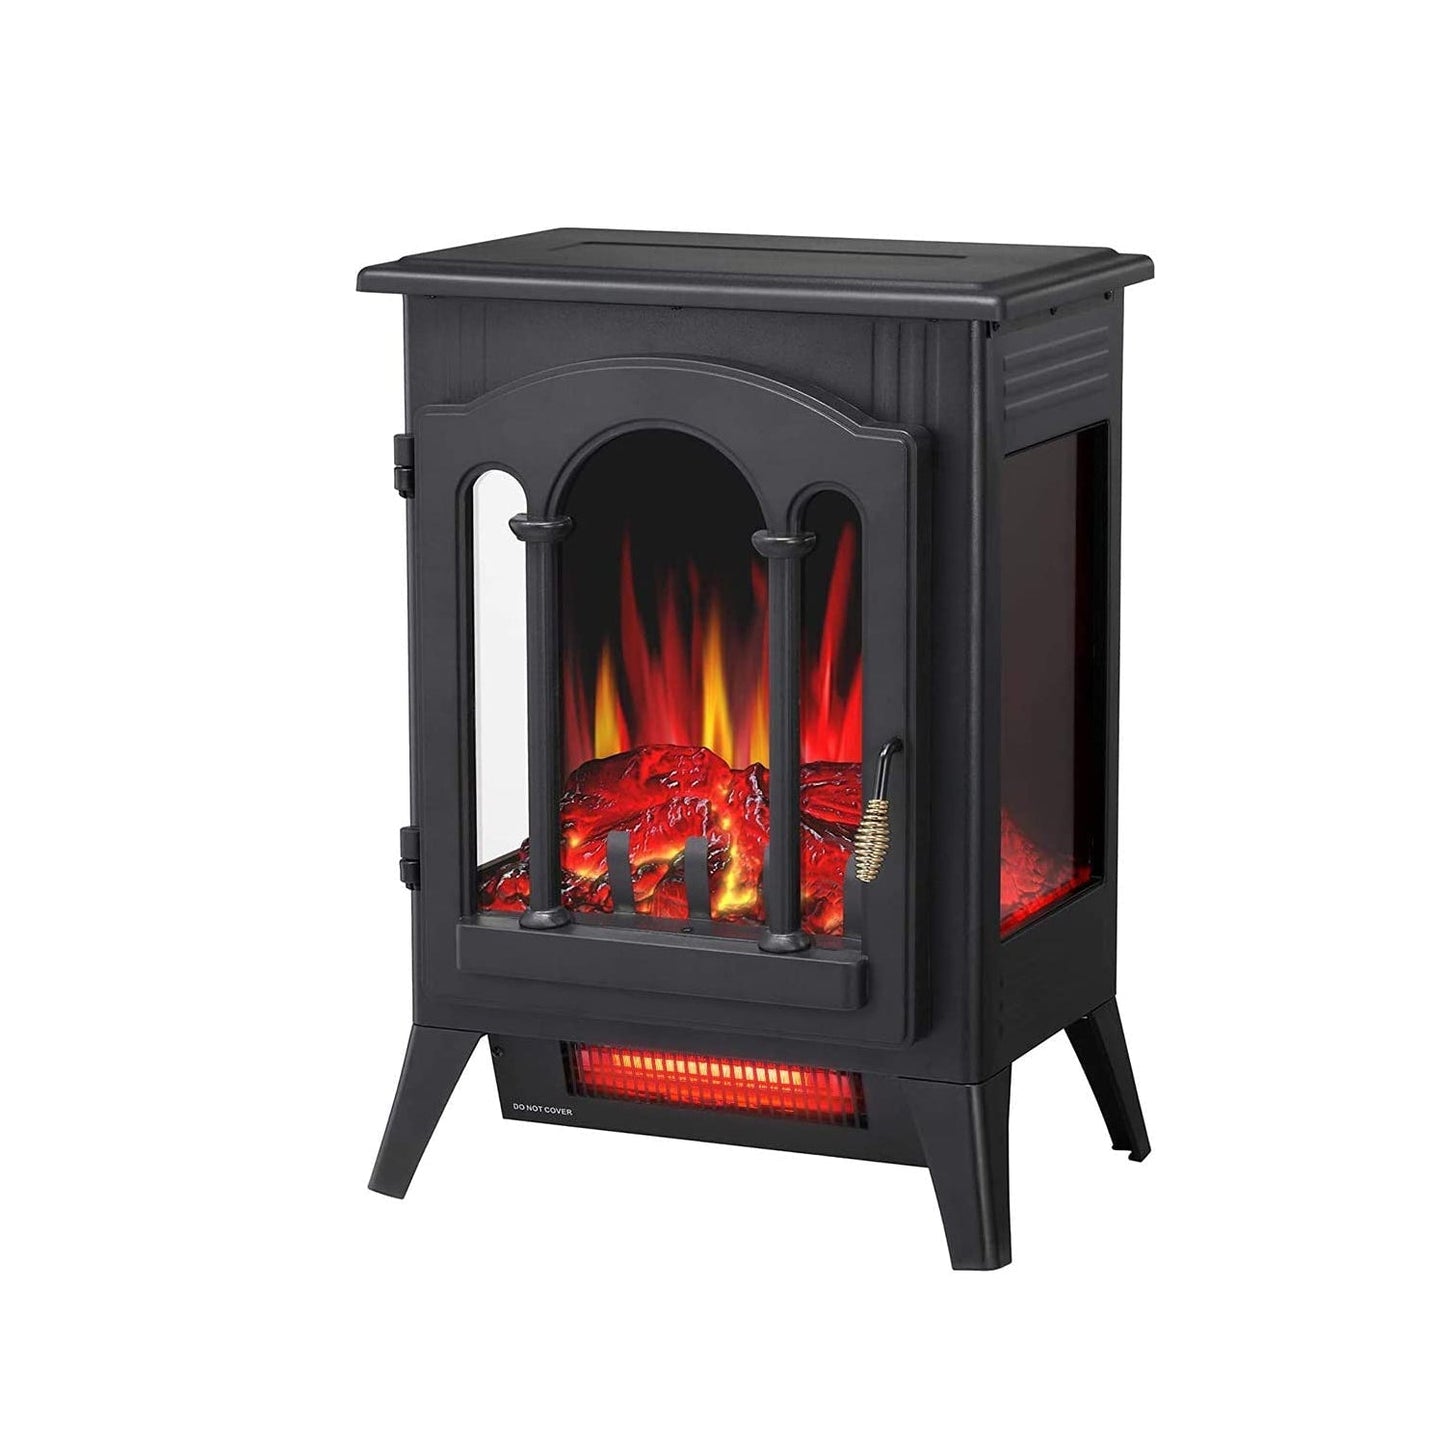 R.W.FLAME 16" 3D Free Standing Outdoor Fireplace